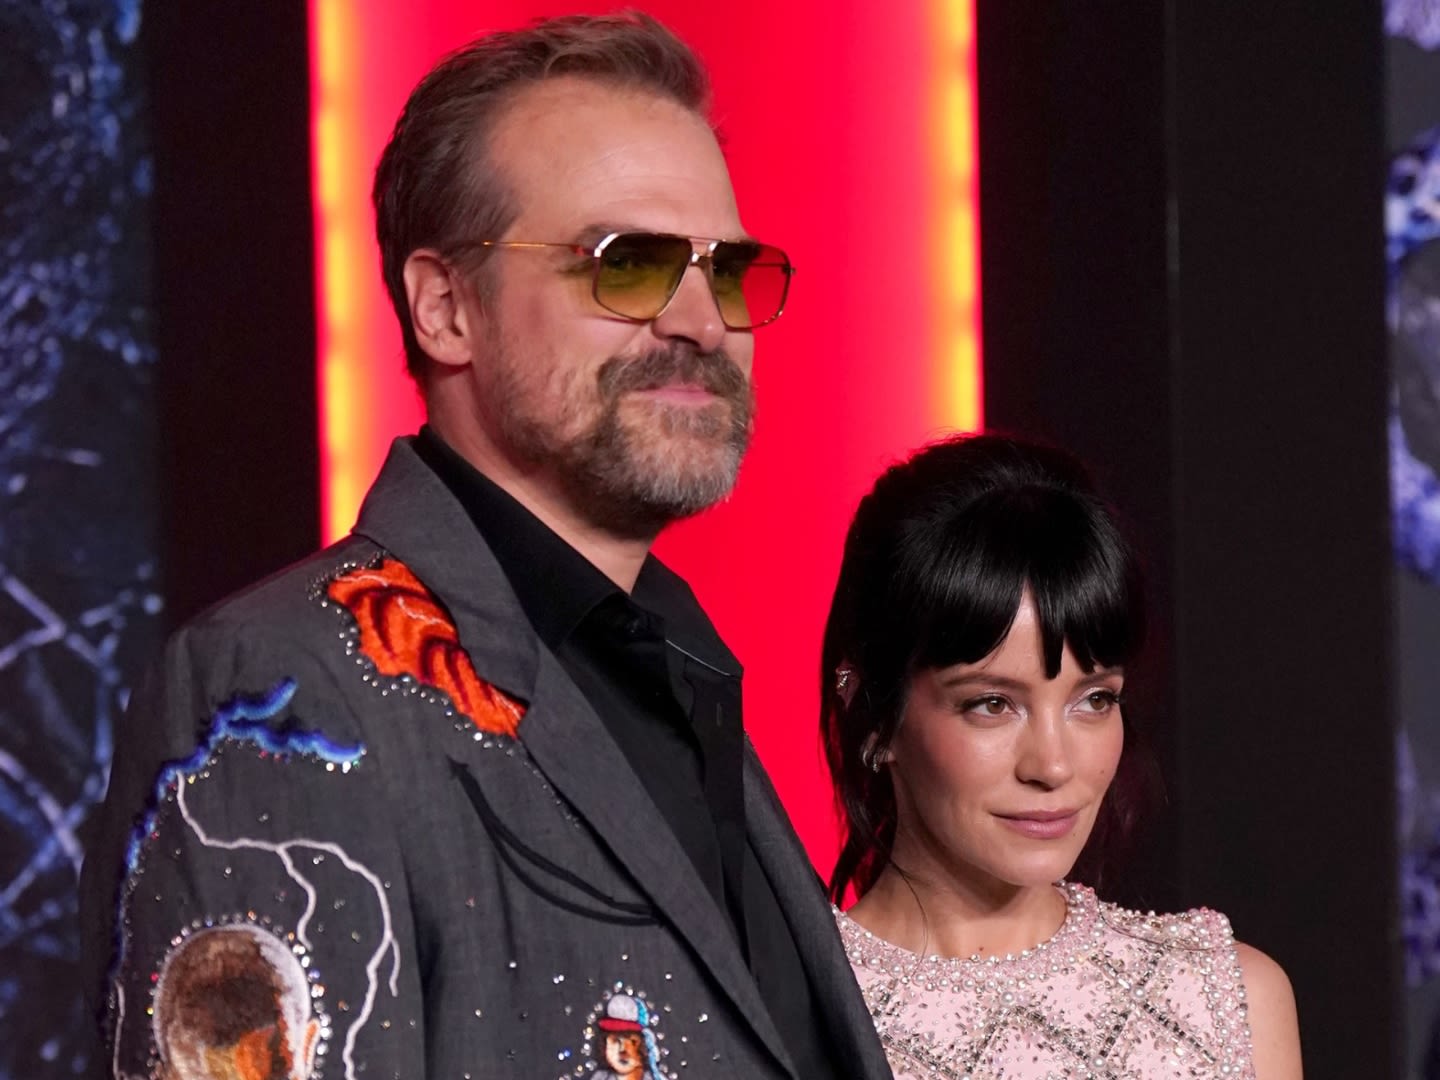 Lily Allen Revealed Exactly What Husband David Harbour Thinks About Her Onlyfans Account